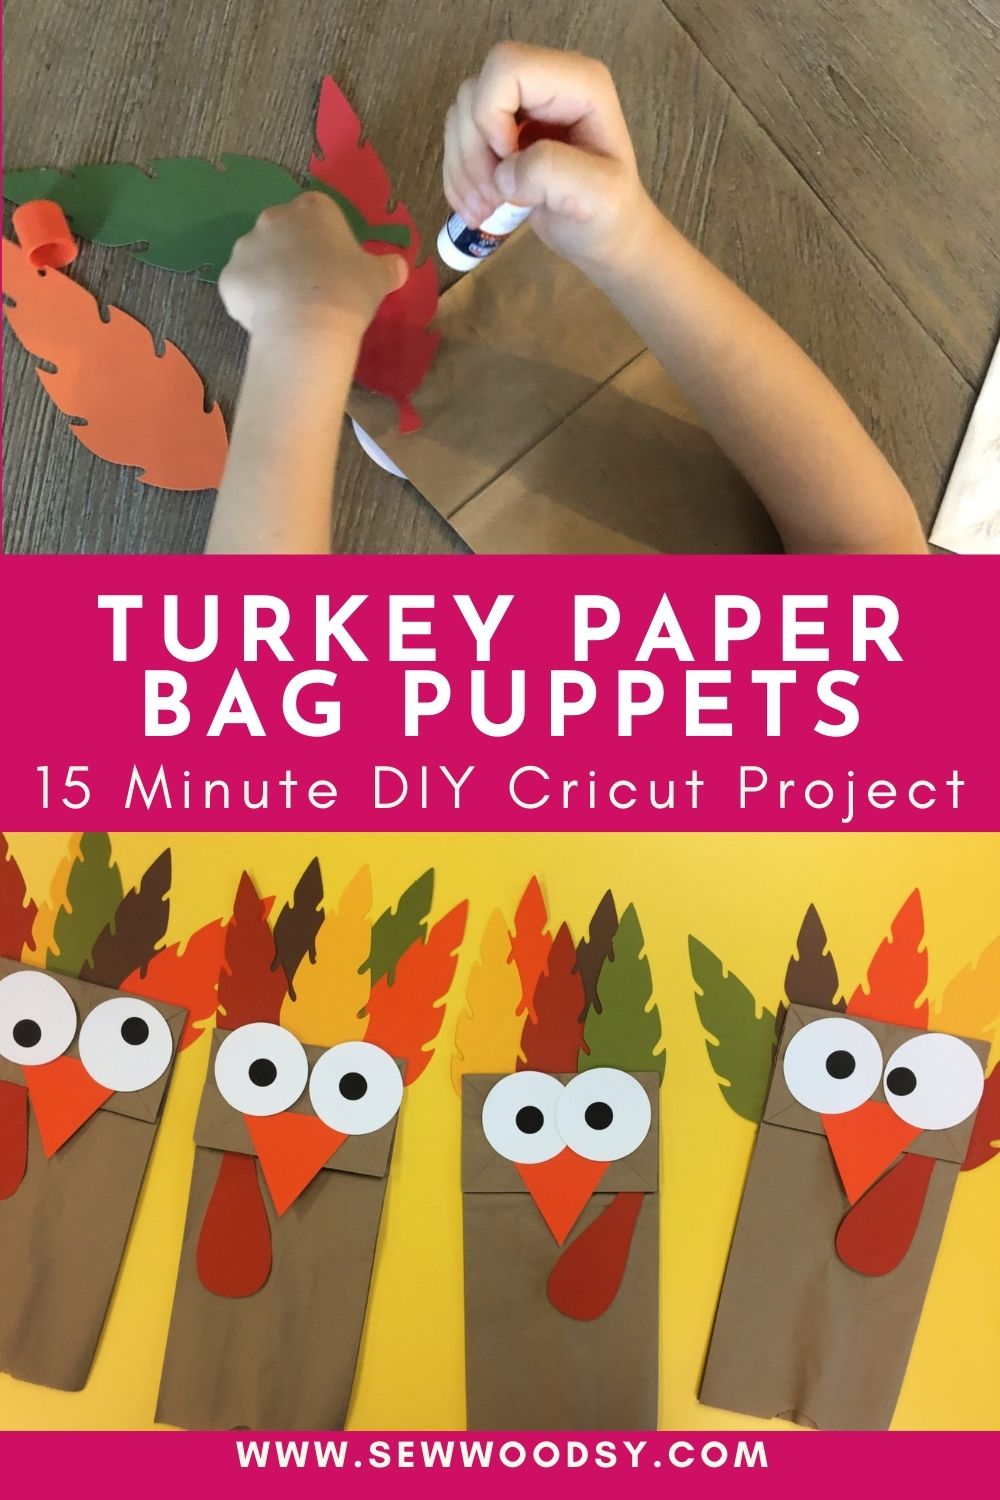 Two photos; top of a kid gluing feathers, bottom of four turkey paper bag puppets split by project title text on image for Pinterest.